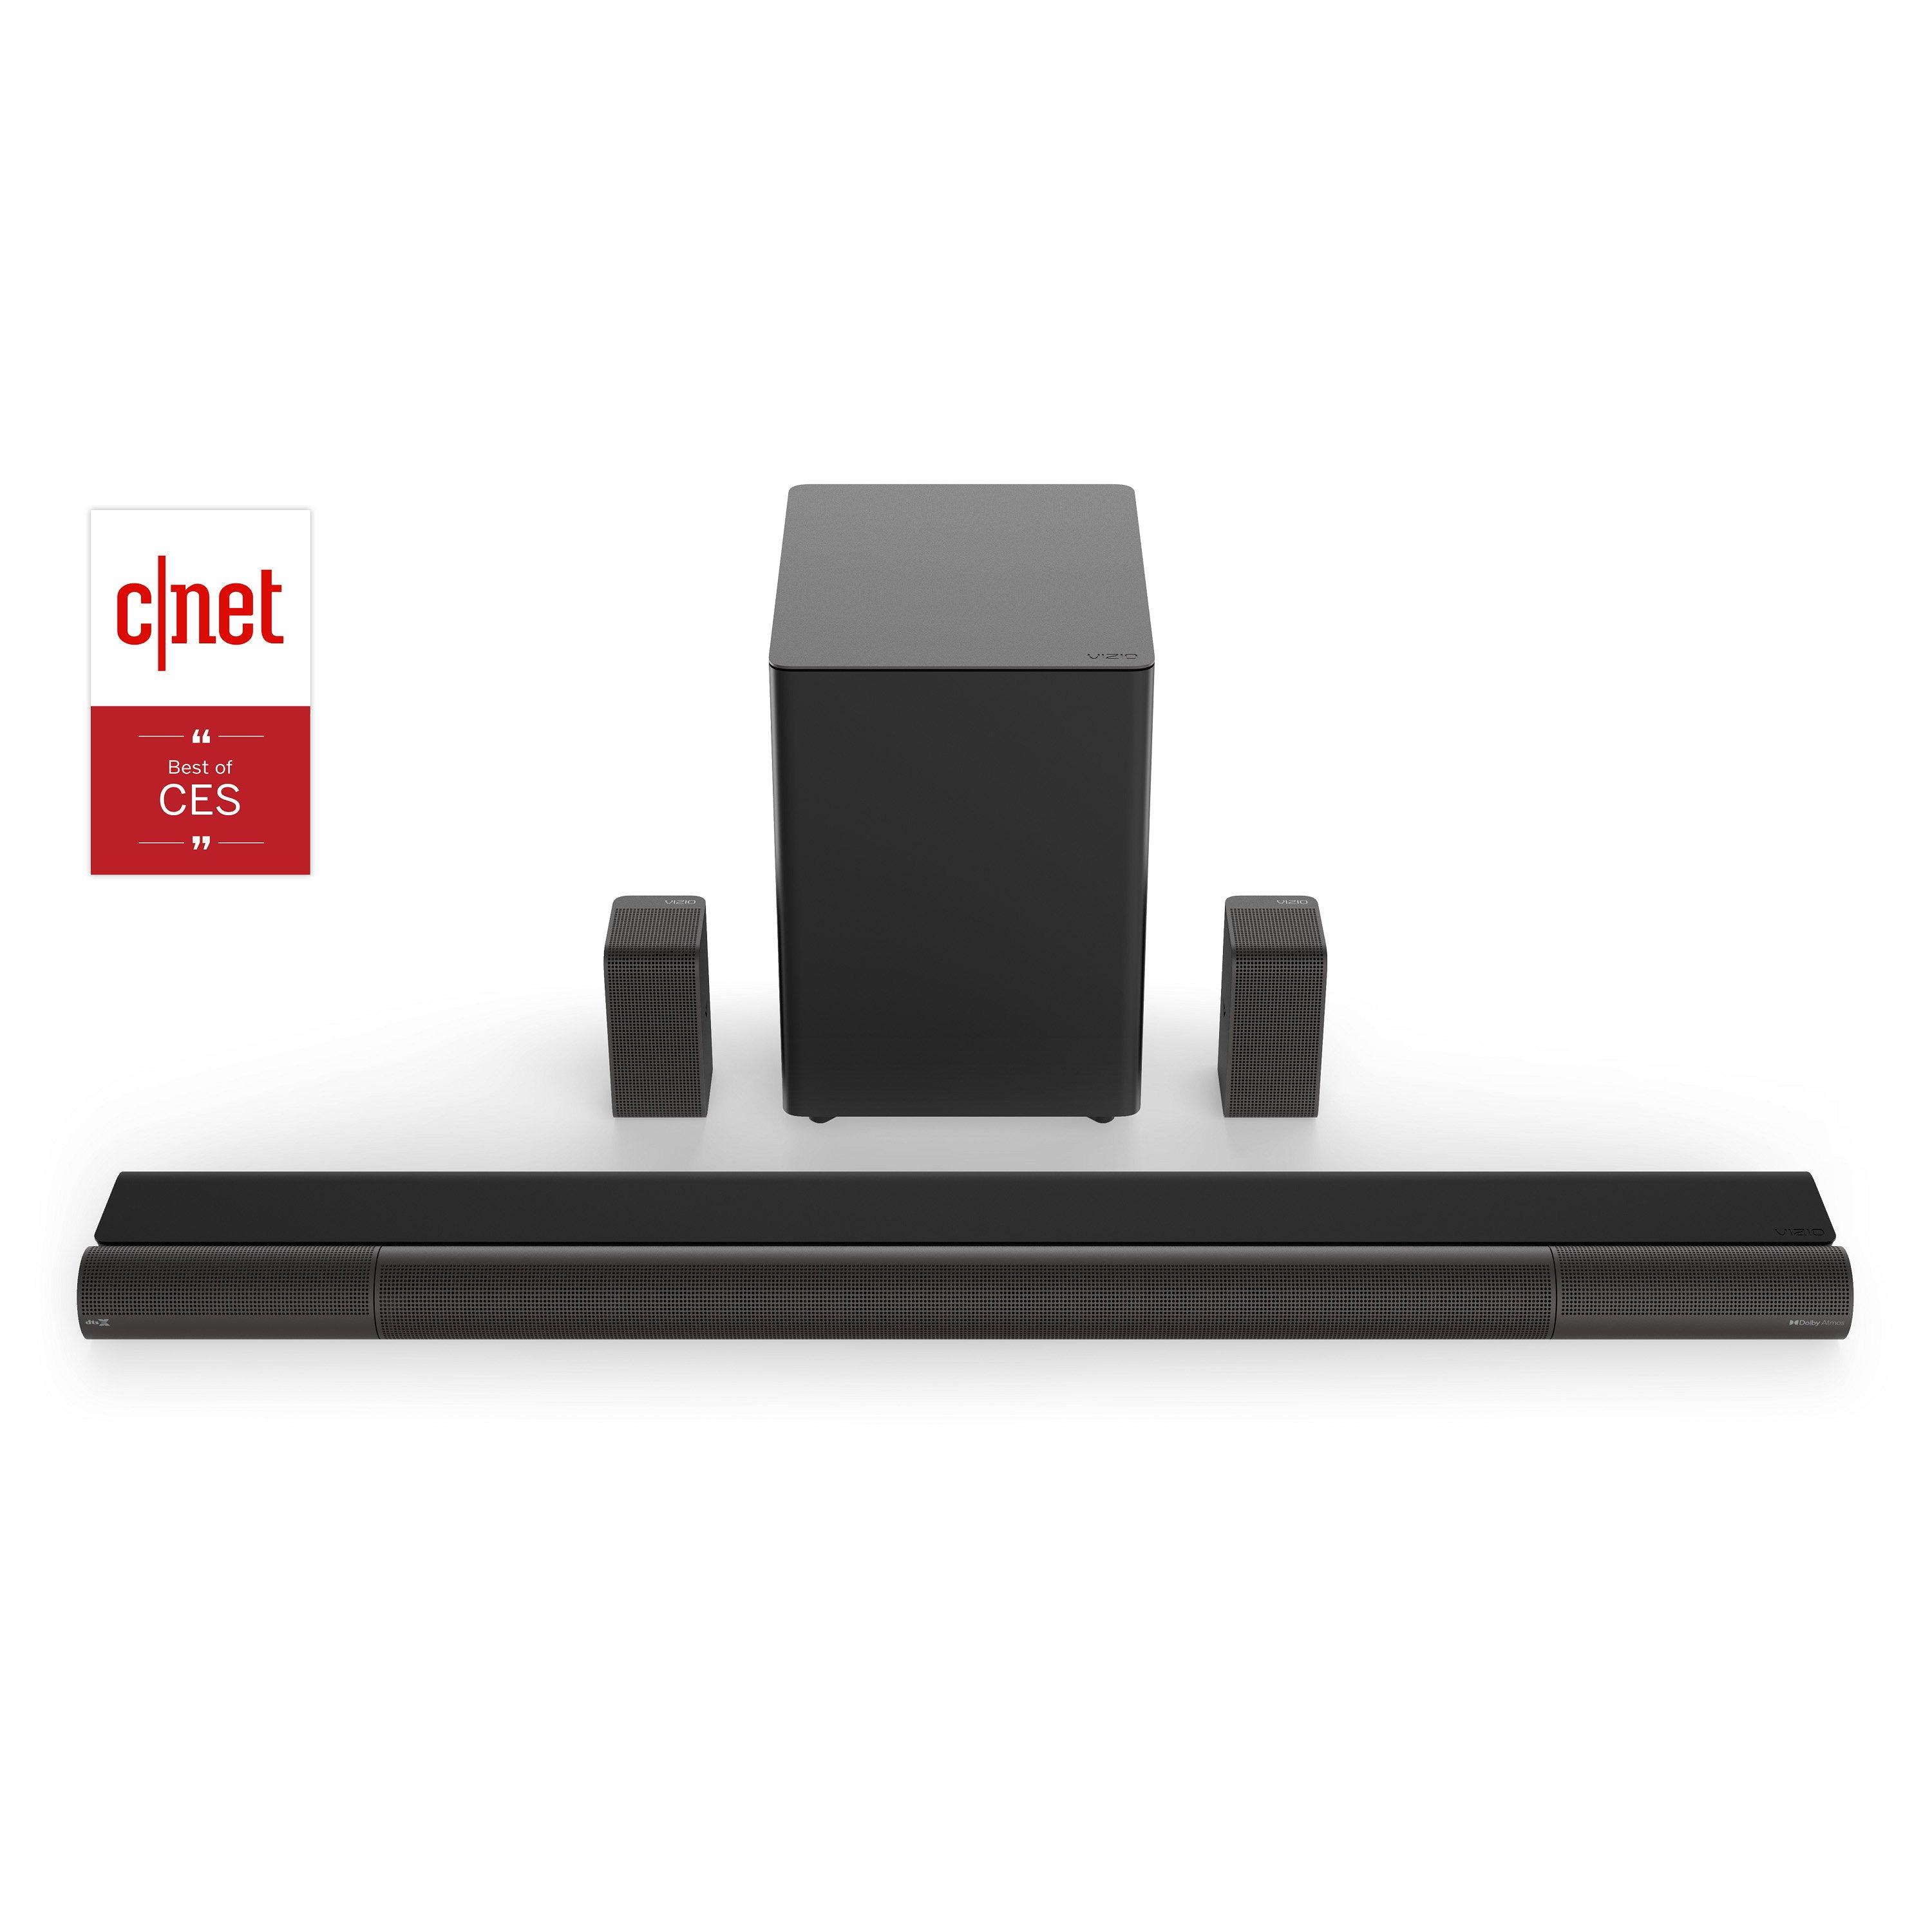 VIZIO Elevate 5.1.4 Home Theater Sound Bar with Dolby Atmos and